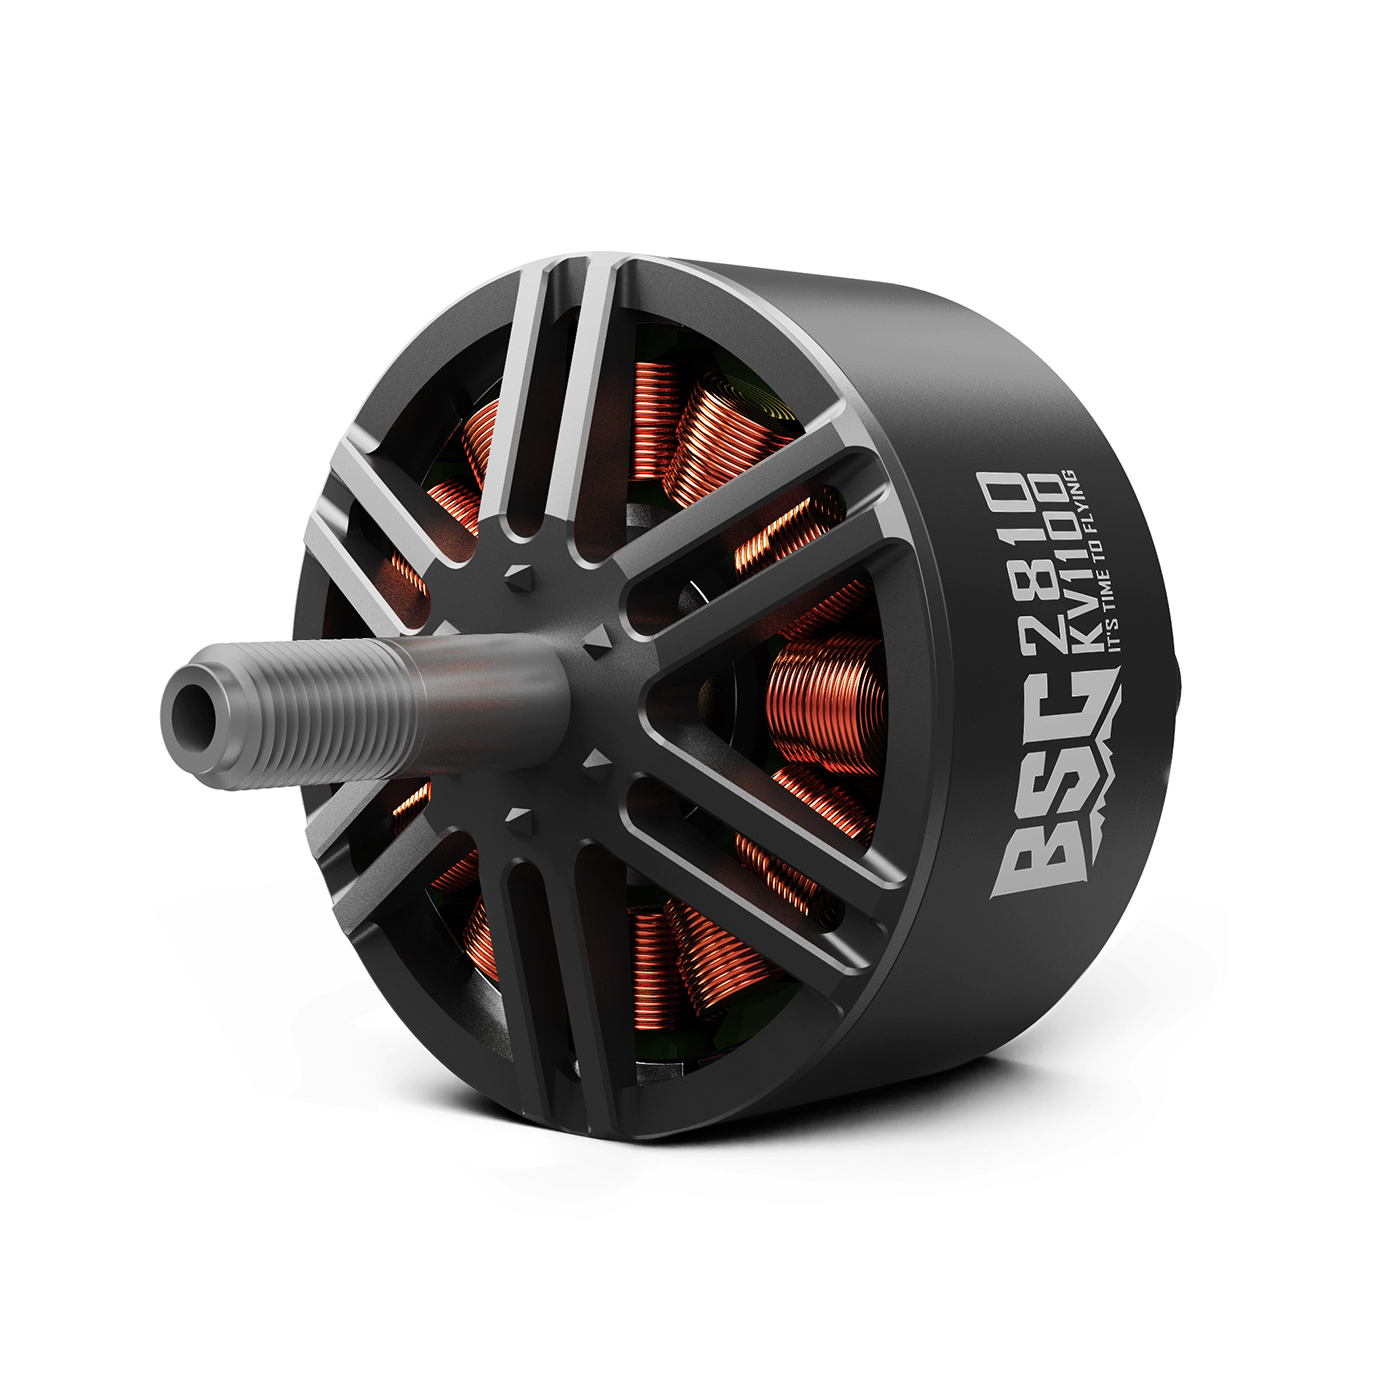 MAD BSC2810 Brushless motor for 10-11inch long range FPV drone/9-10inch X8 Cinelifter drone